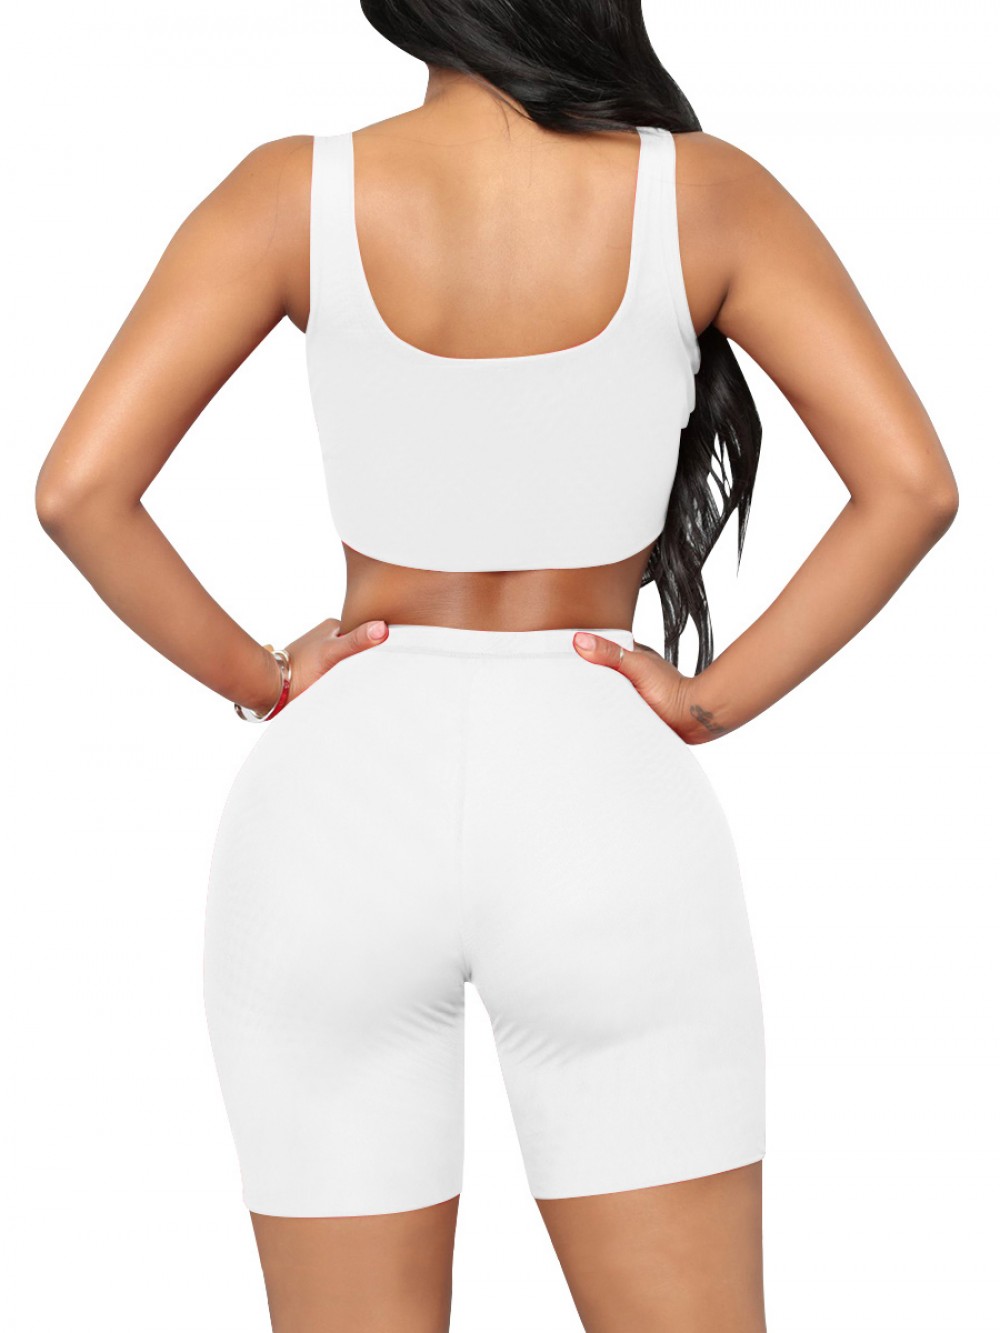 Upgrade White Cropped Sports Shorts Suit High Waist Exercise Outfit